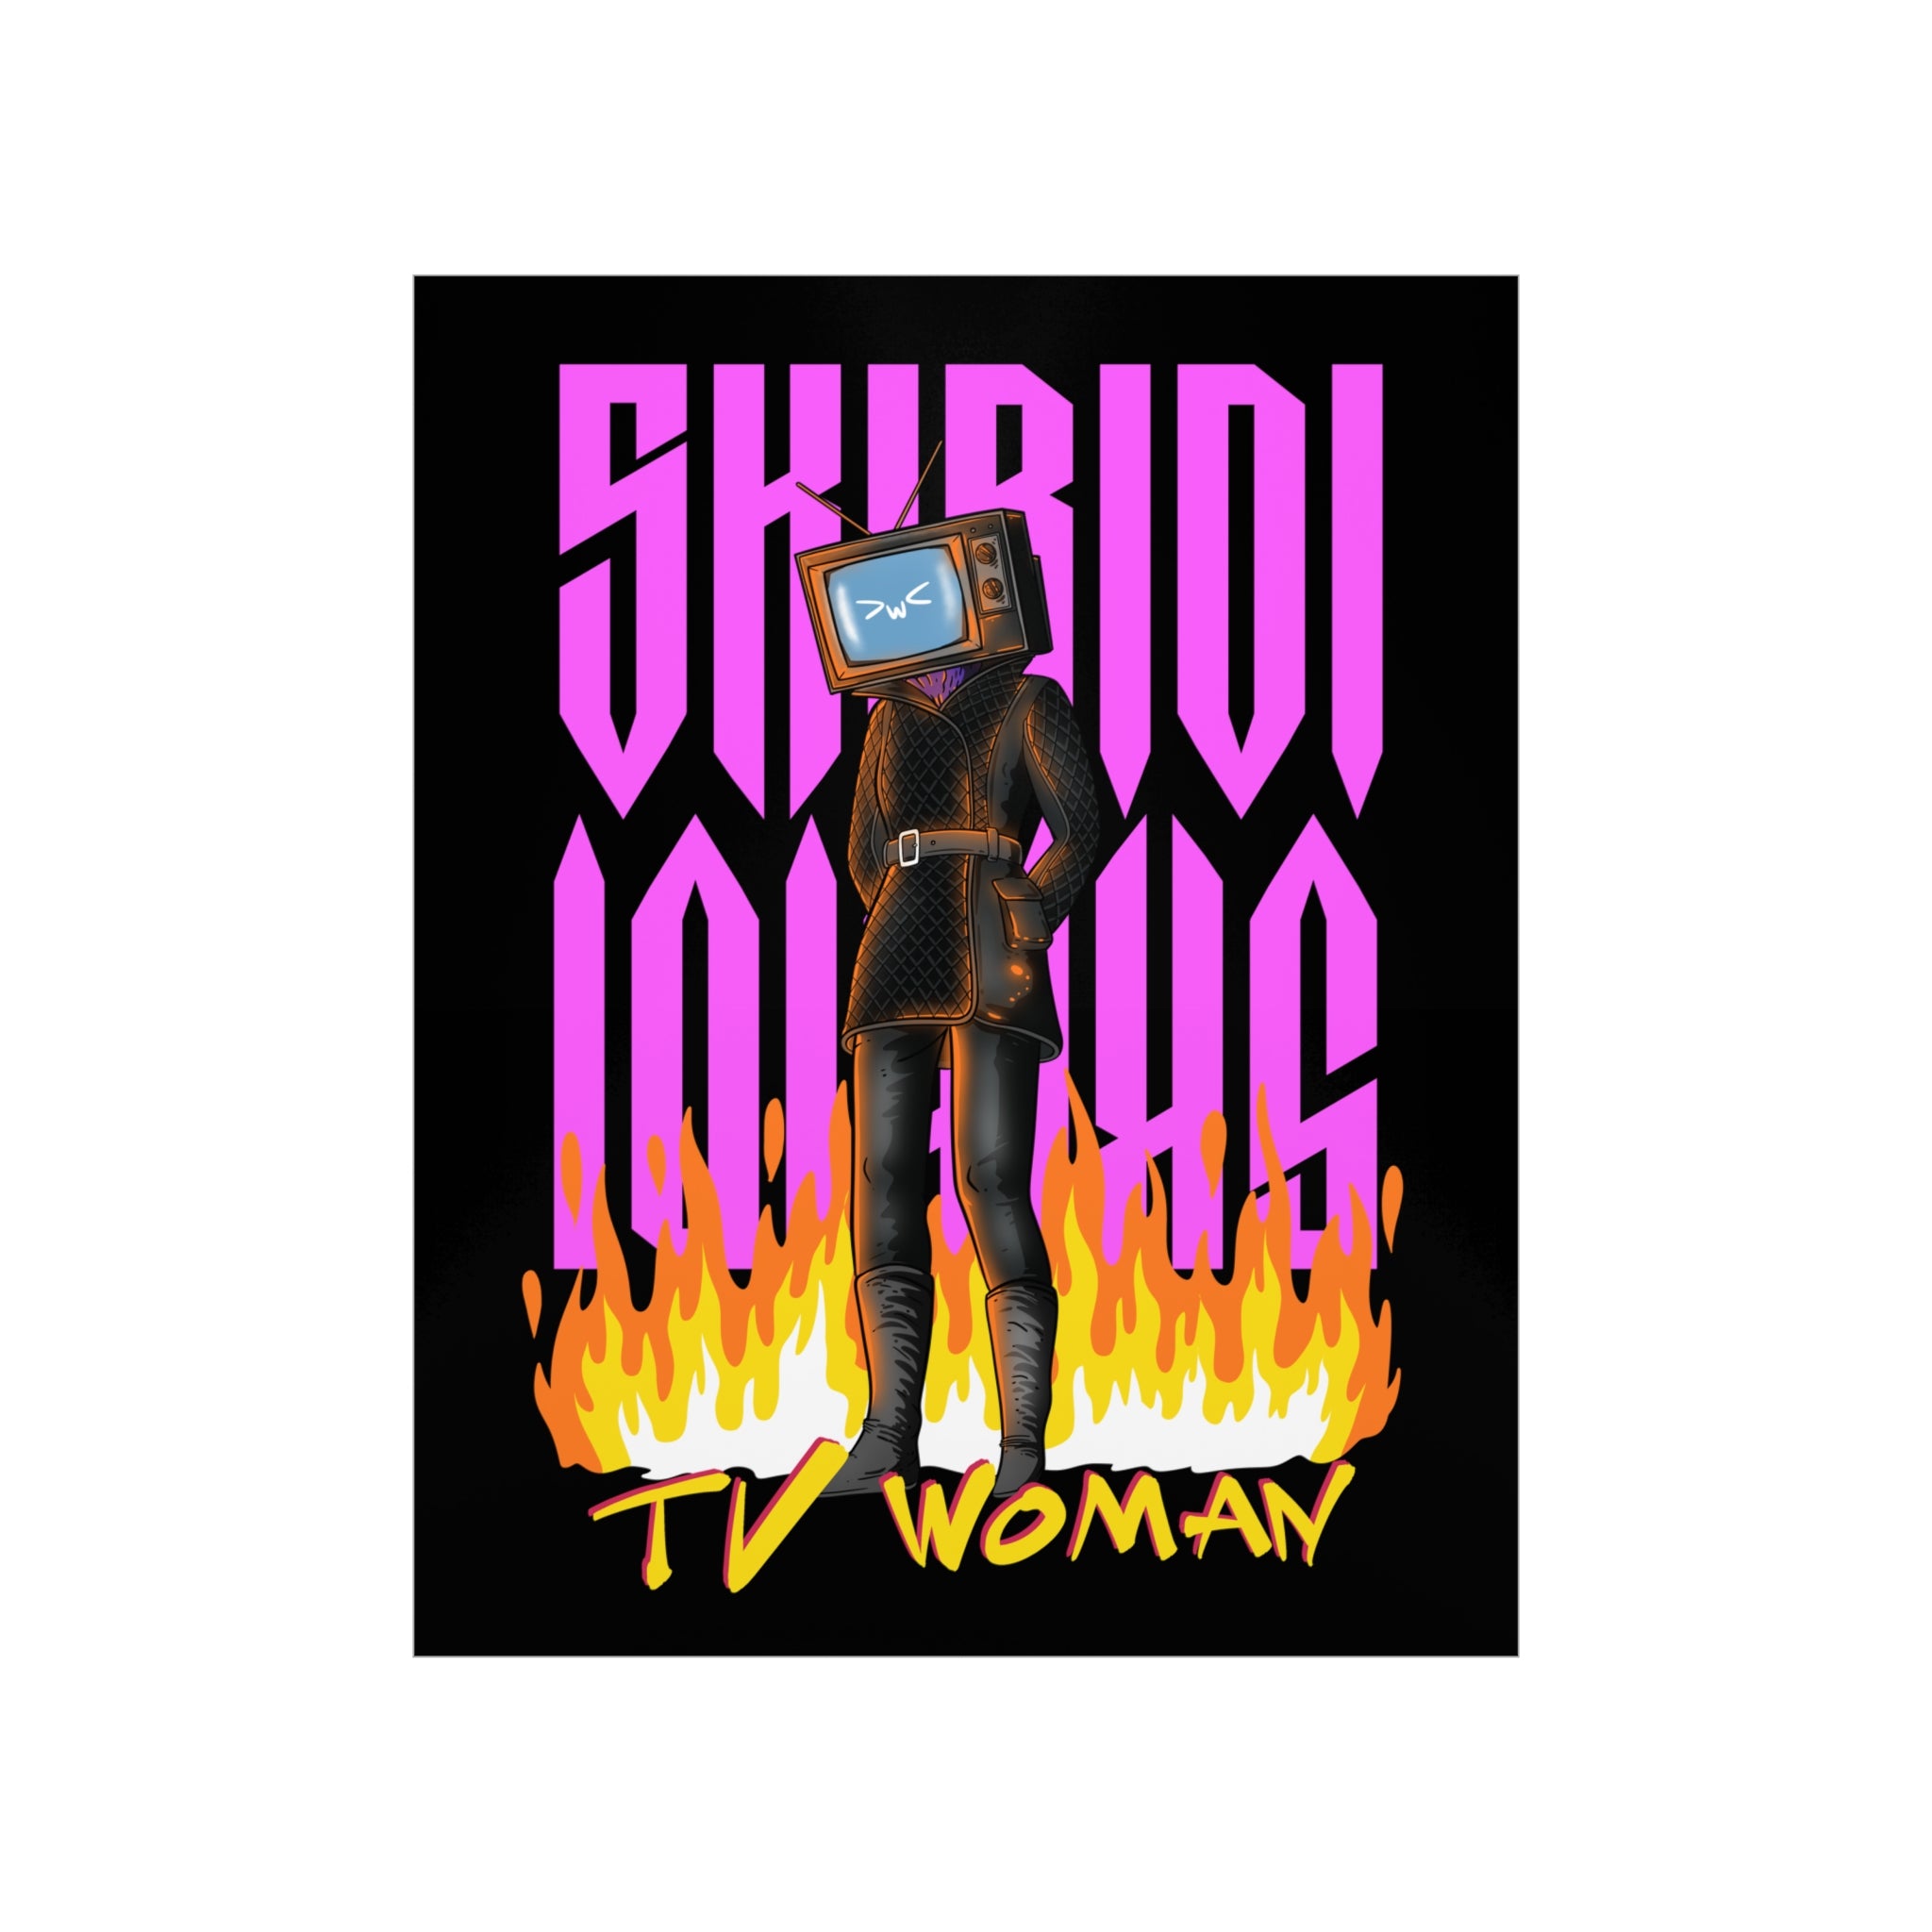 16"x20" matte black poster with TV Woman design amidst flames and Skibidi text